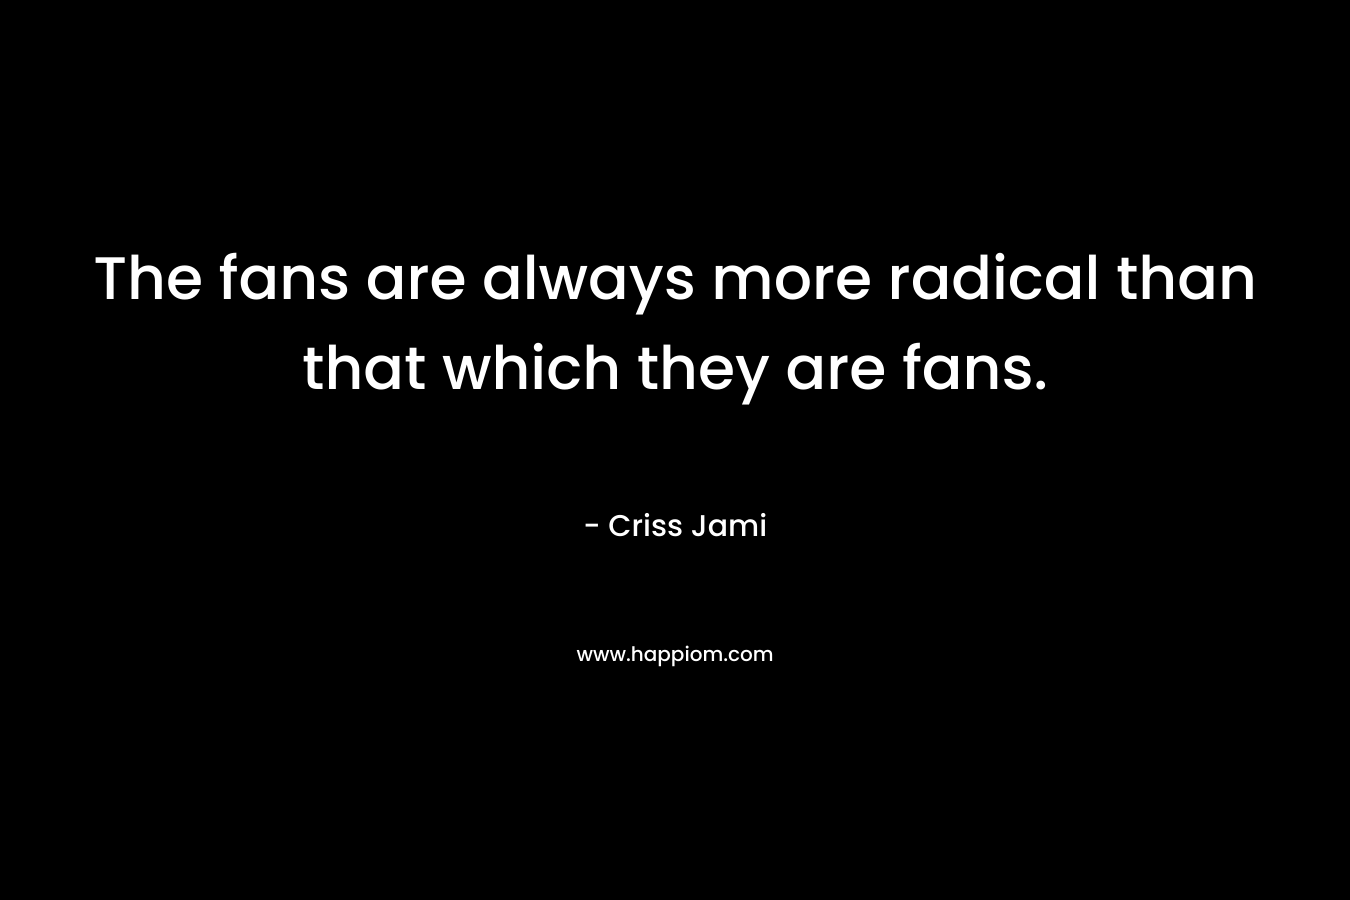 The fans are always more radical than that which they are fans. – Criss Jami